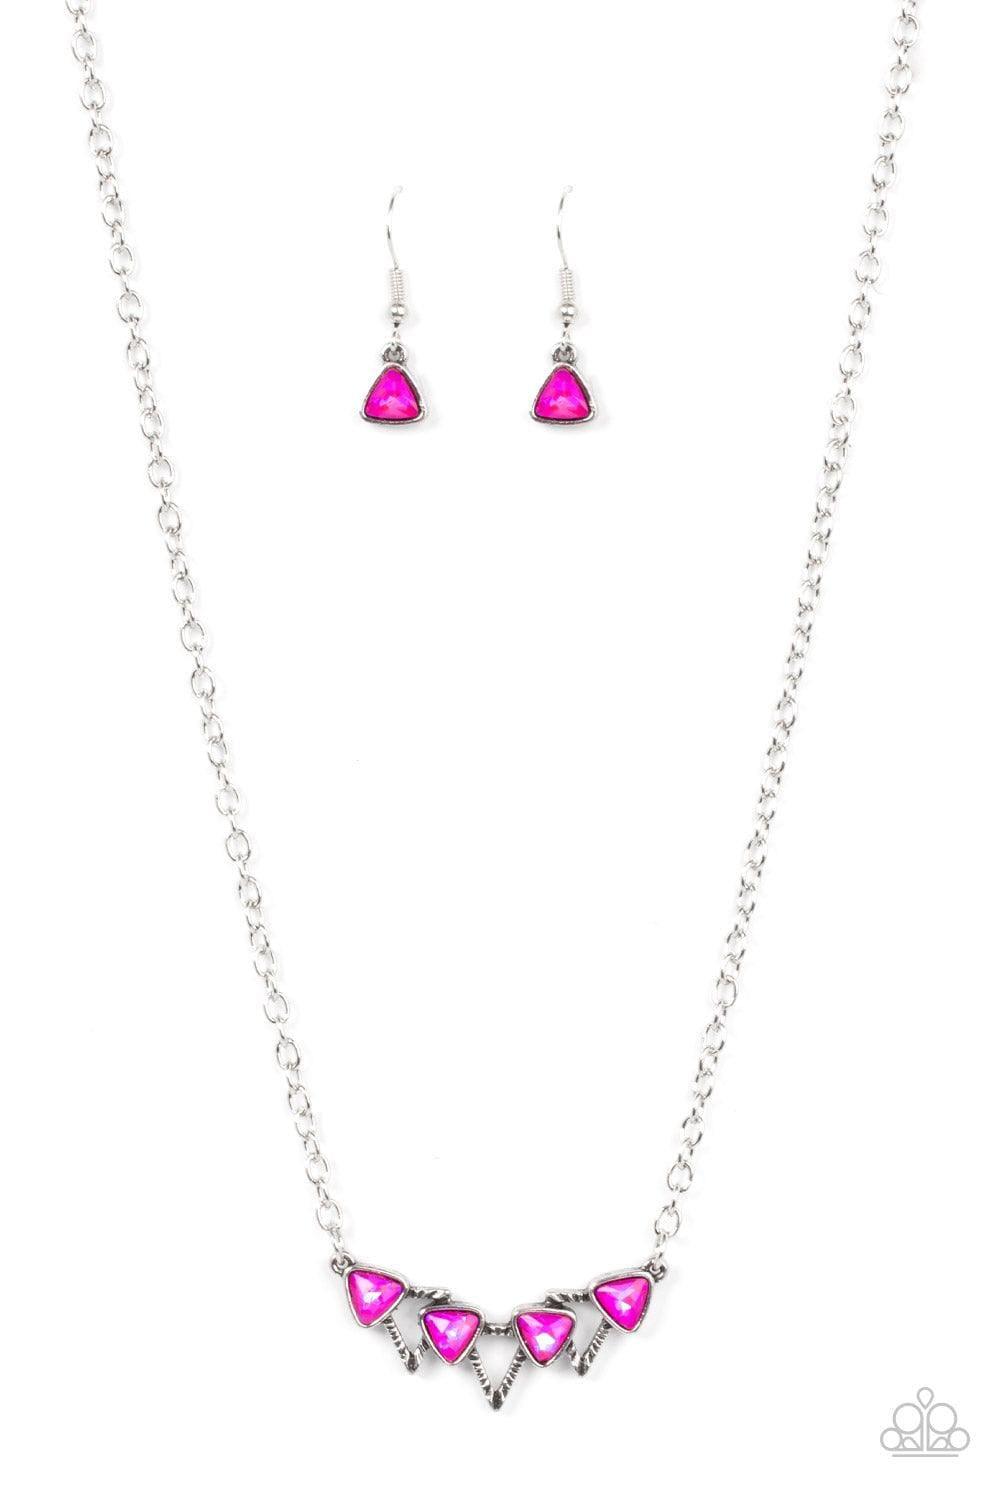 Paparazzi Accessories - Pyramid Prowl - Pink Necklace - Bling by JessieK